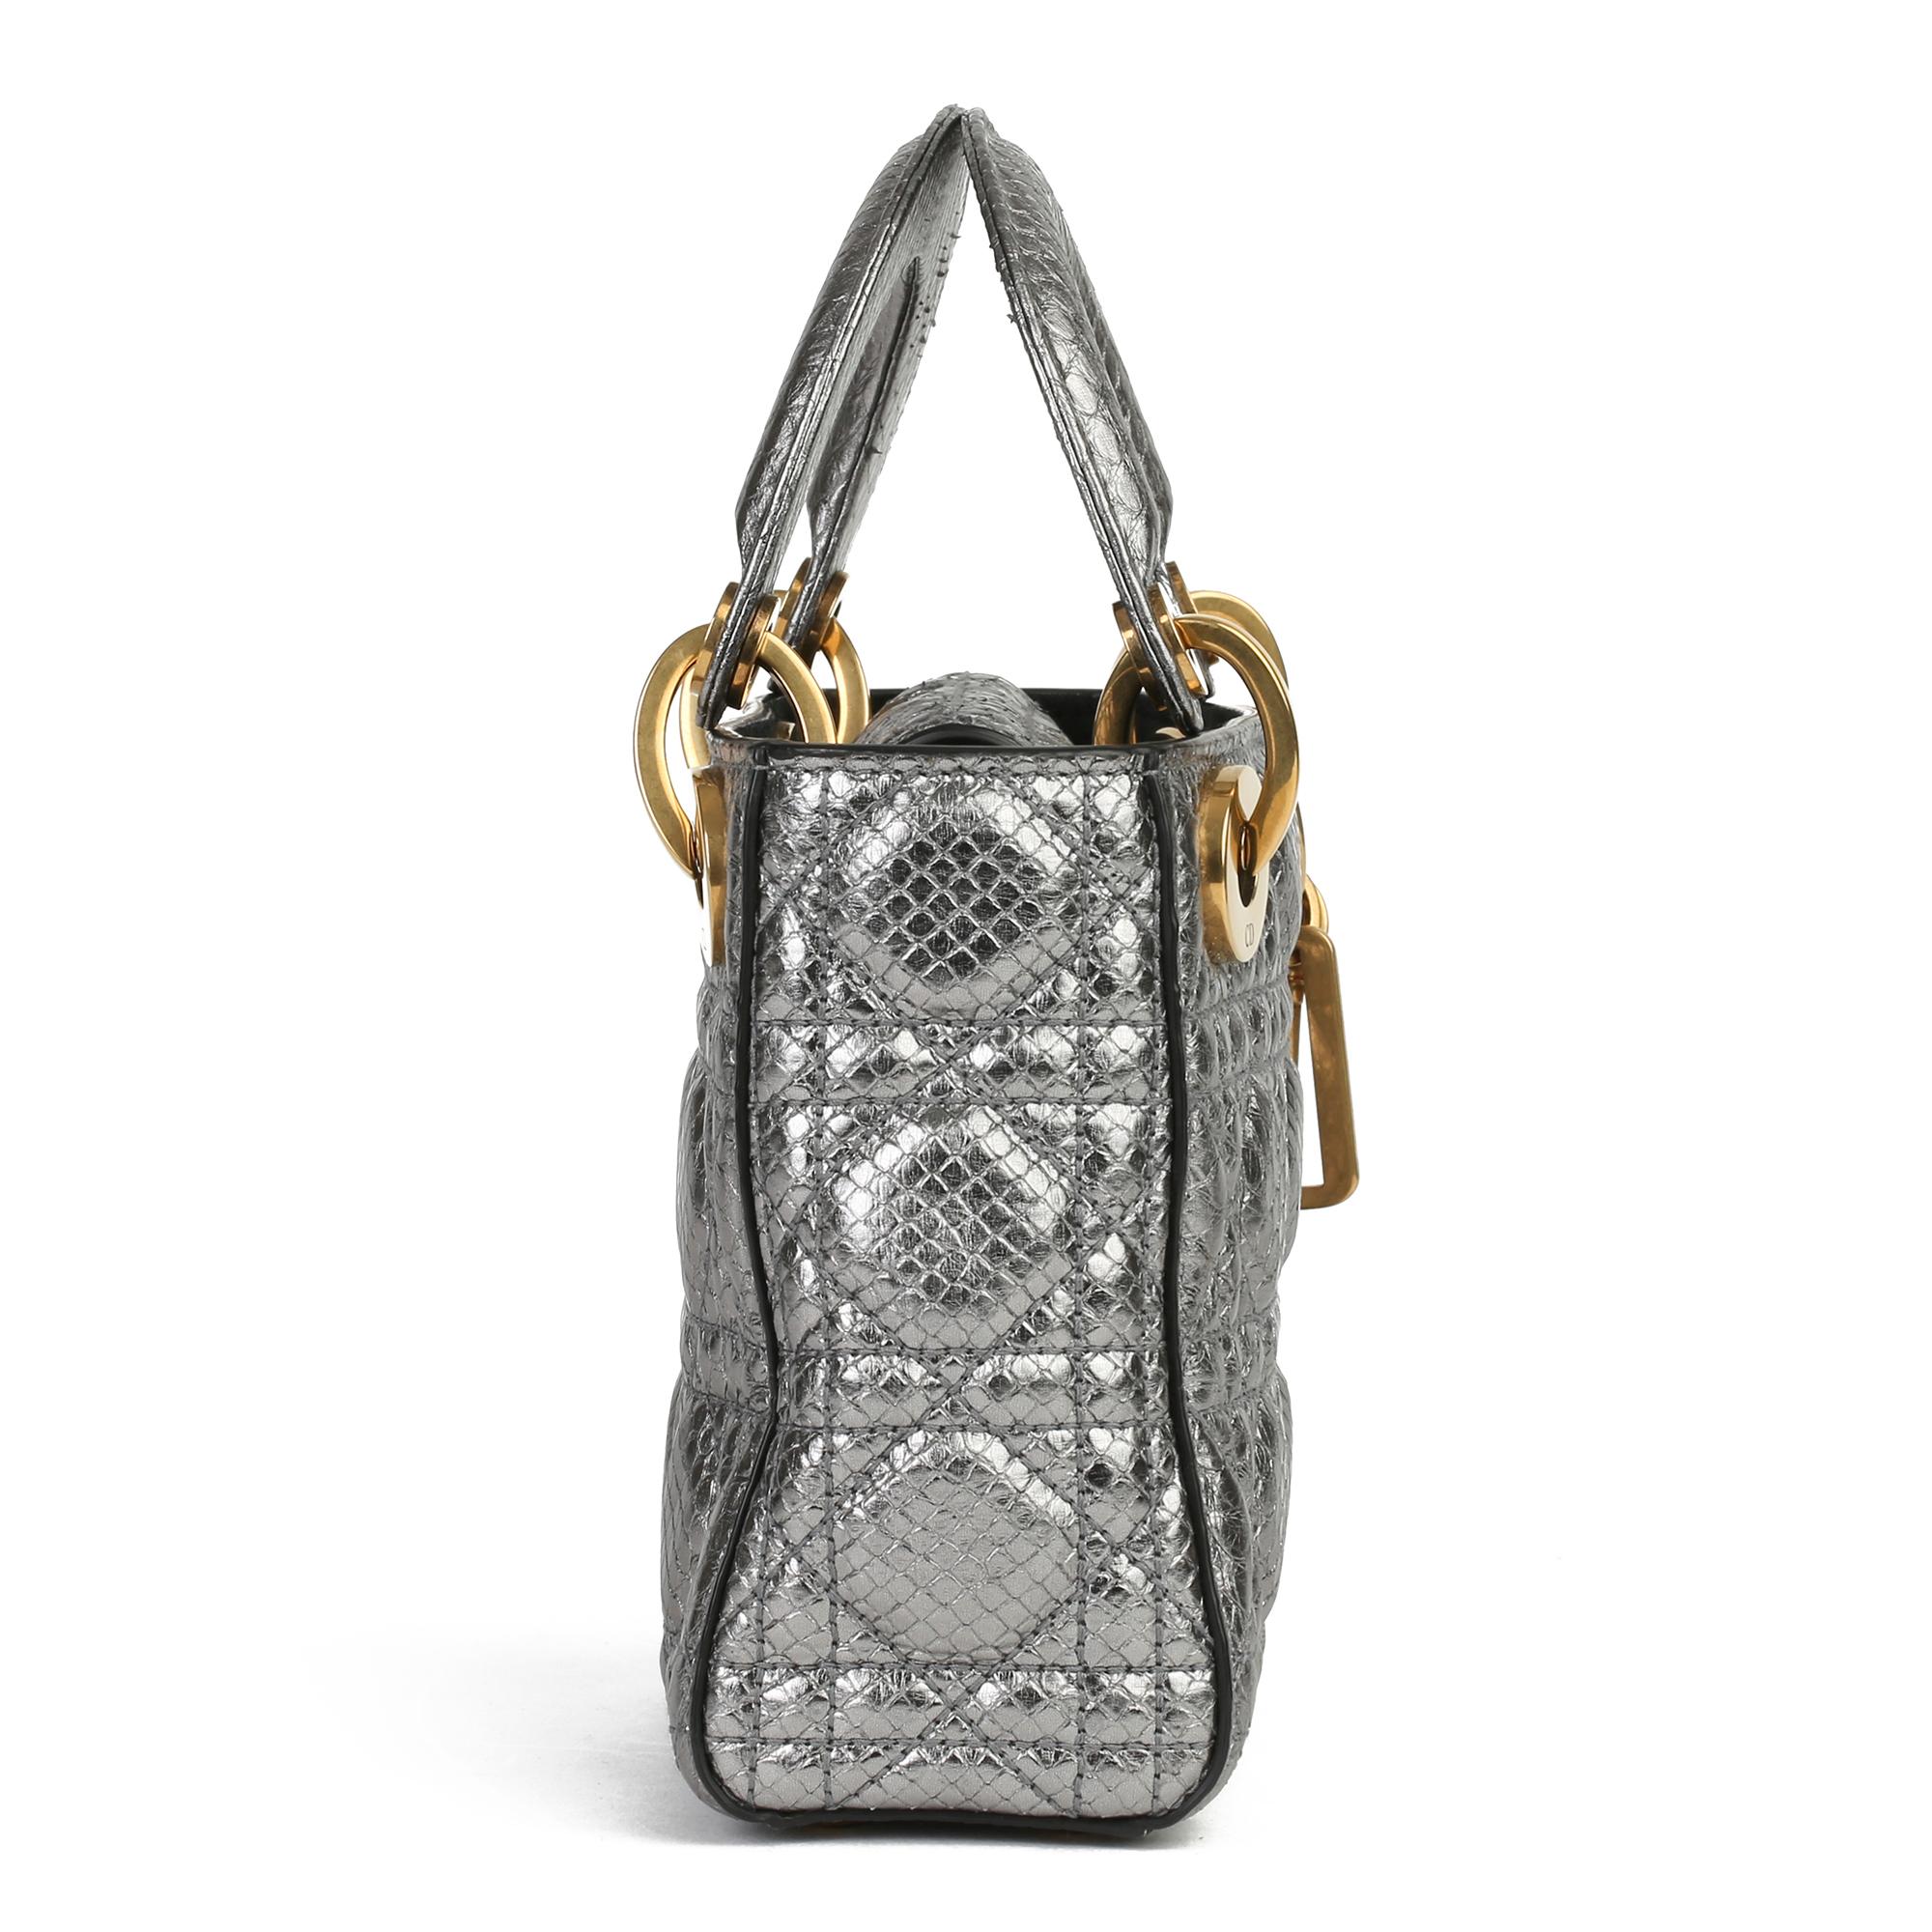 CHRISTIAN DIOR
Gunmetal Quilted Metallic Python Leather Mini Lady Dior 

Xupes Reference: CB252
Serial Number: 02-MA-0177
Age (Circa): 2017
Accompanied By: Dior Dust Bag, Shoulder Strap, Authenticity Card, Care Booklet
Authenticity Details: Date